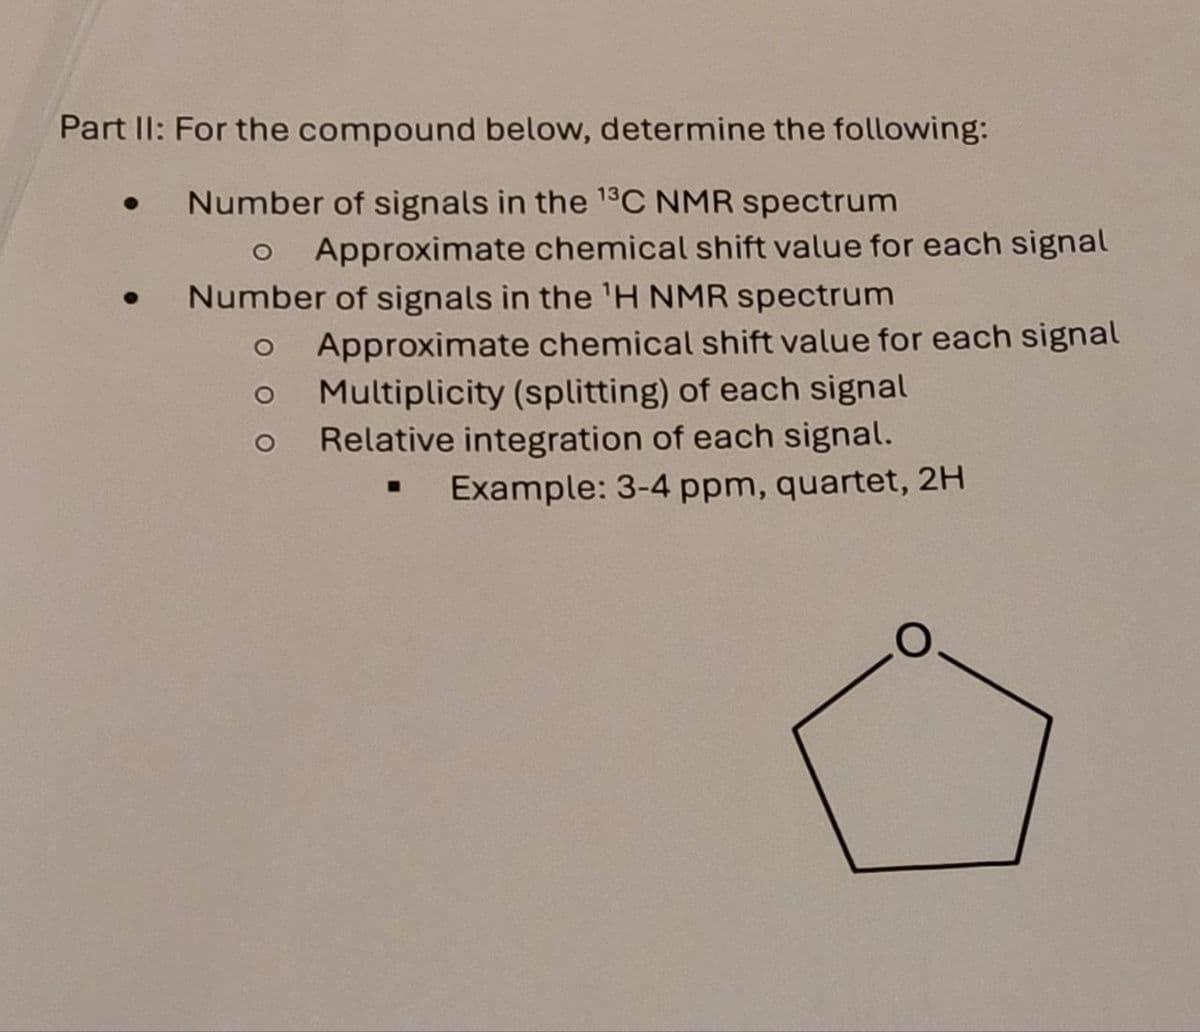 Part II: For the compound below, determine the following:
• Number of signals in the 13C NMR spectrum
o Approximate chemical shift value for each signal
Number of signals in the 'H NMR spectrum
O
O
Approximate chemical shift value for each signal
Multiplicity (splitting) of each signal
Relative integration of each signal.
B
Example: 3-4 ppm, quartet, 2H